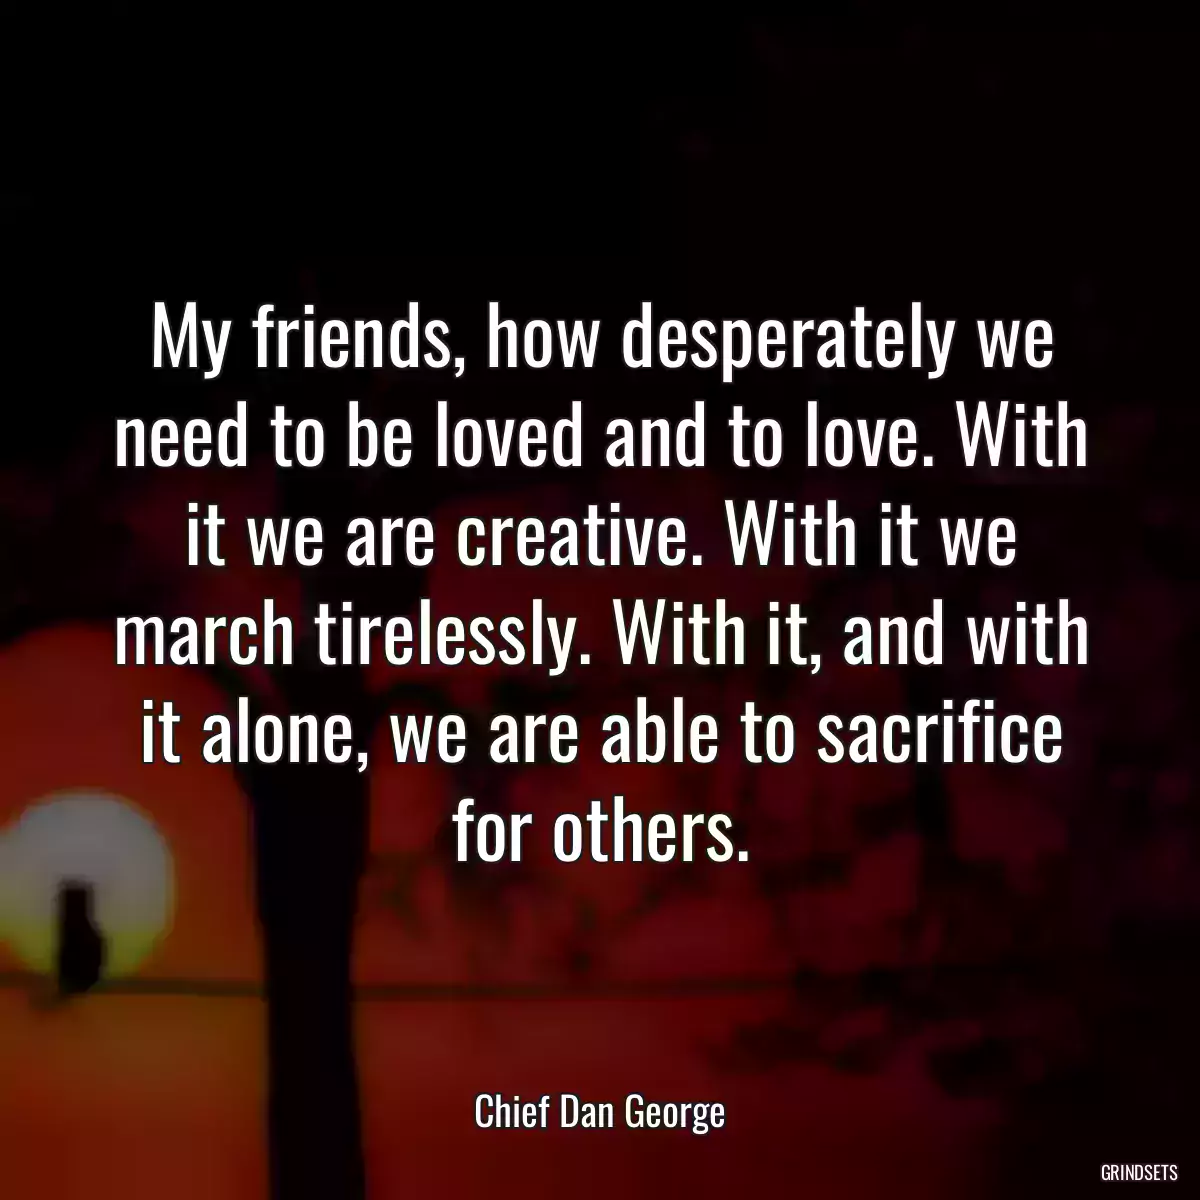 My friends, how desperately we need to be loved and to love. With it we are creative. With it we march tirelessly. With it, and with it alone, we are able to sacrifice for others.